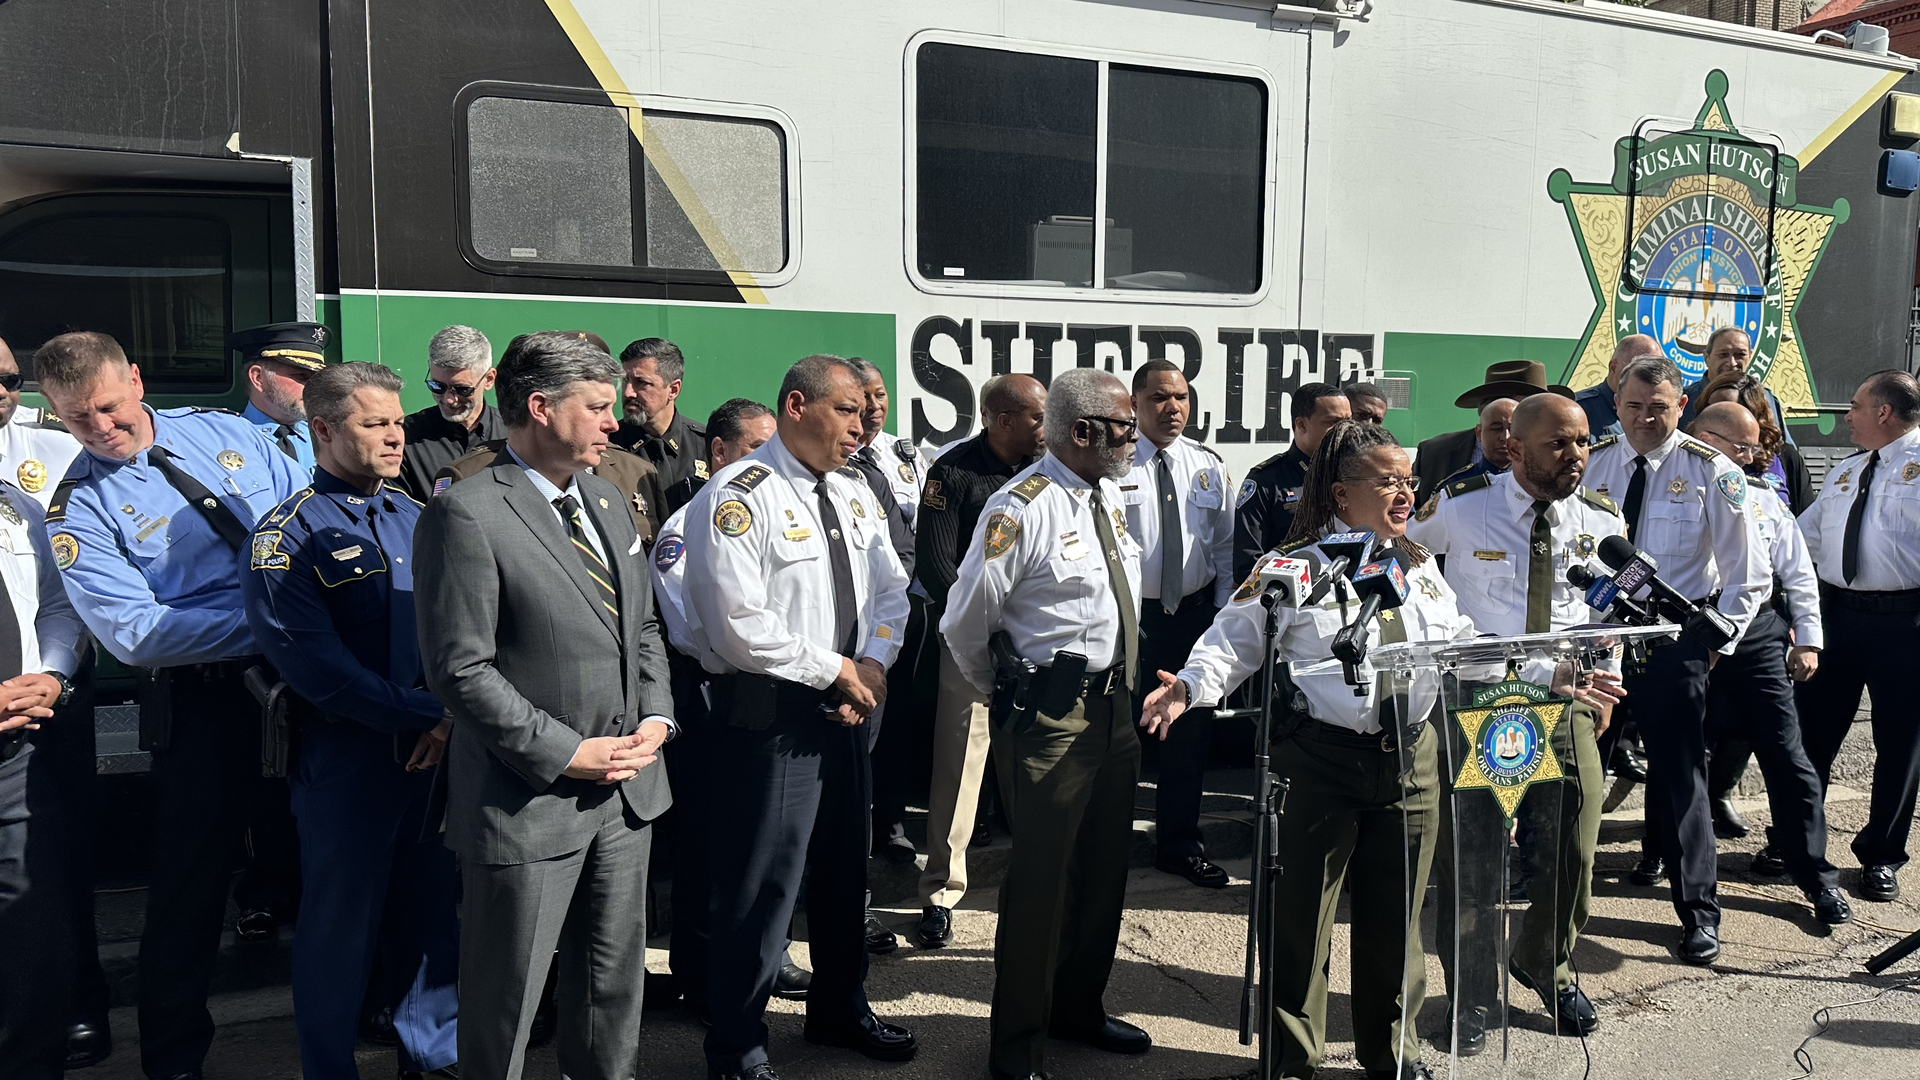 Orleans Parish Sheiff Susan Hutson speaks at a podium. She is flanked by over a dozen other regional law enforcement officers.